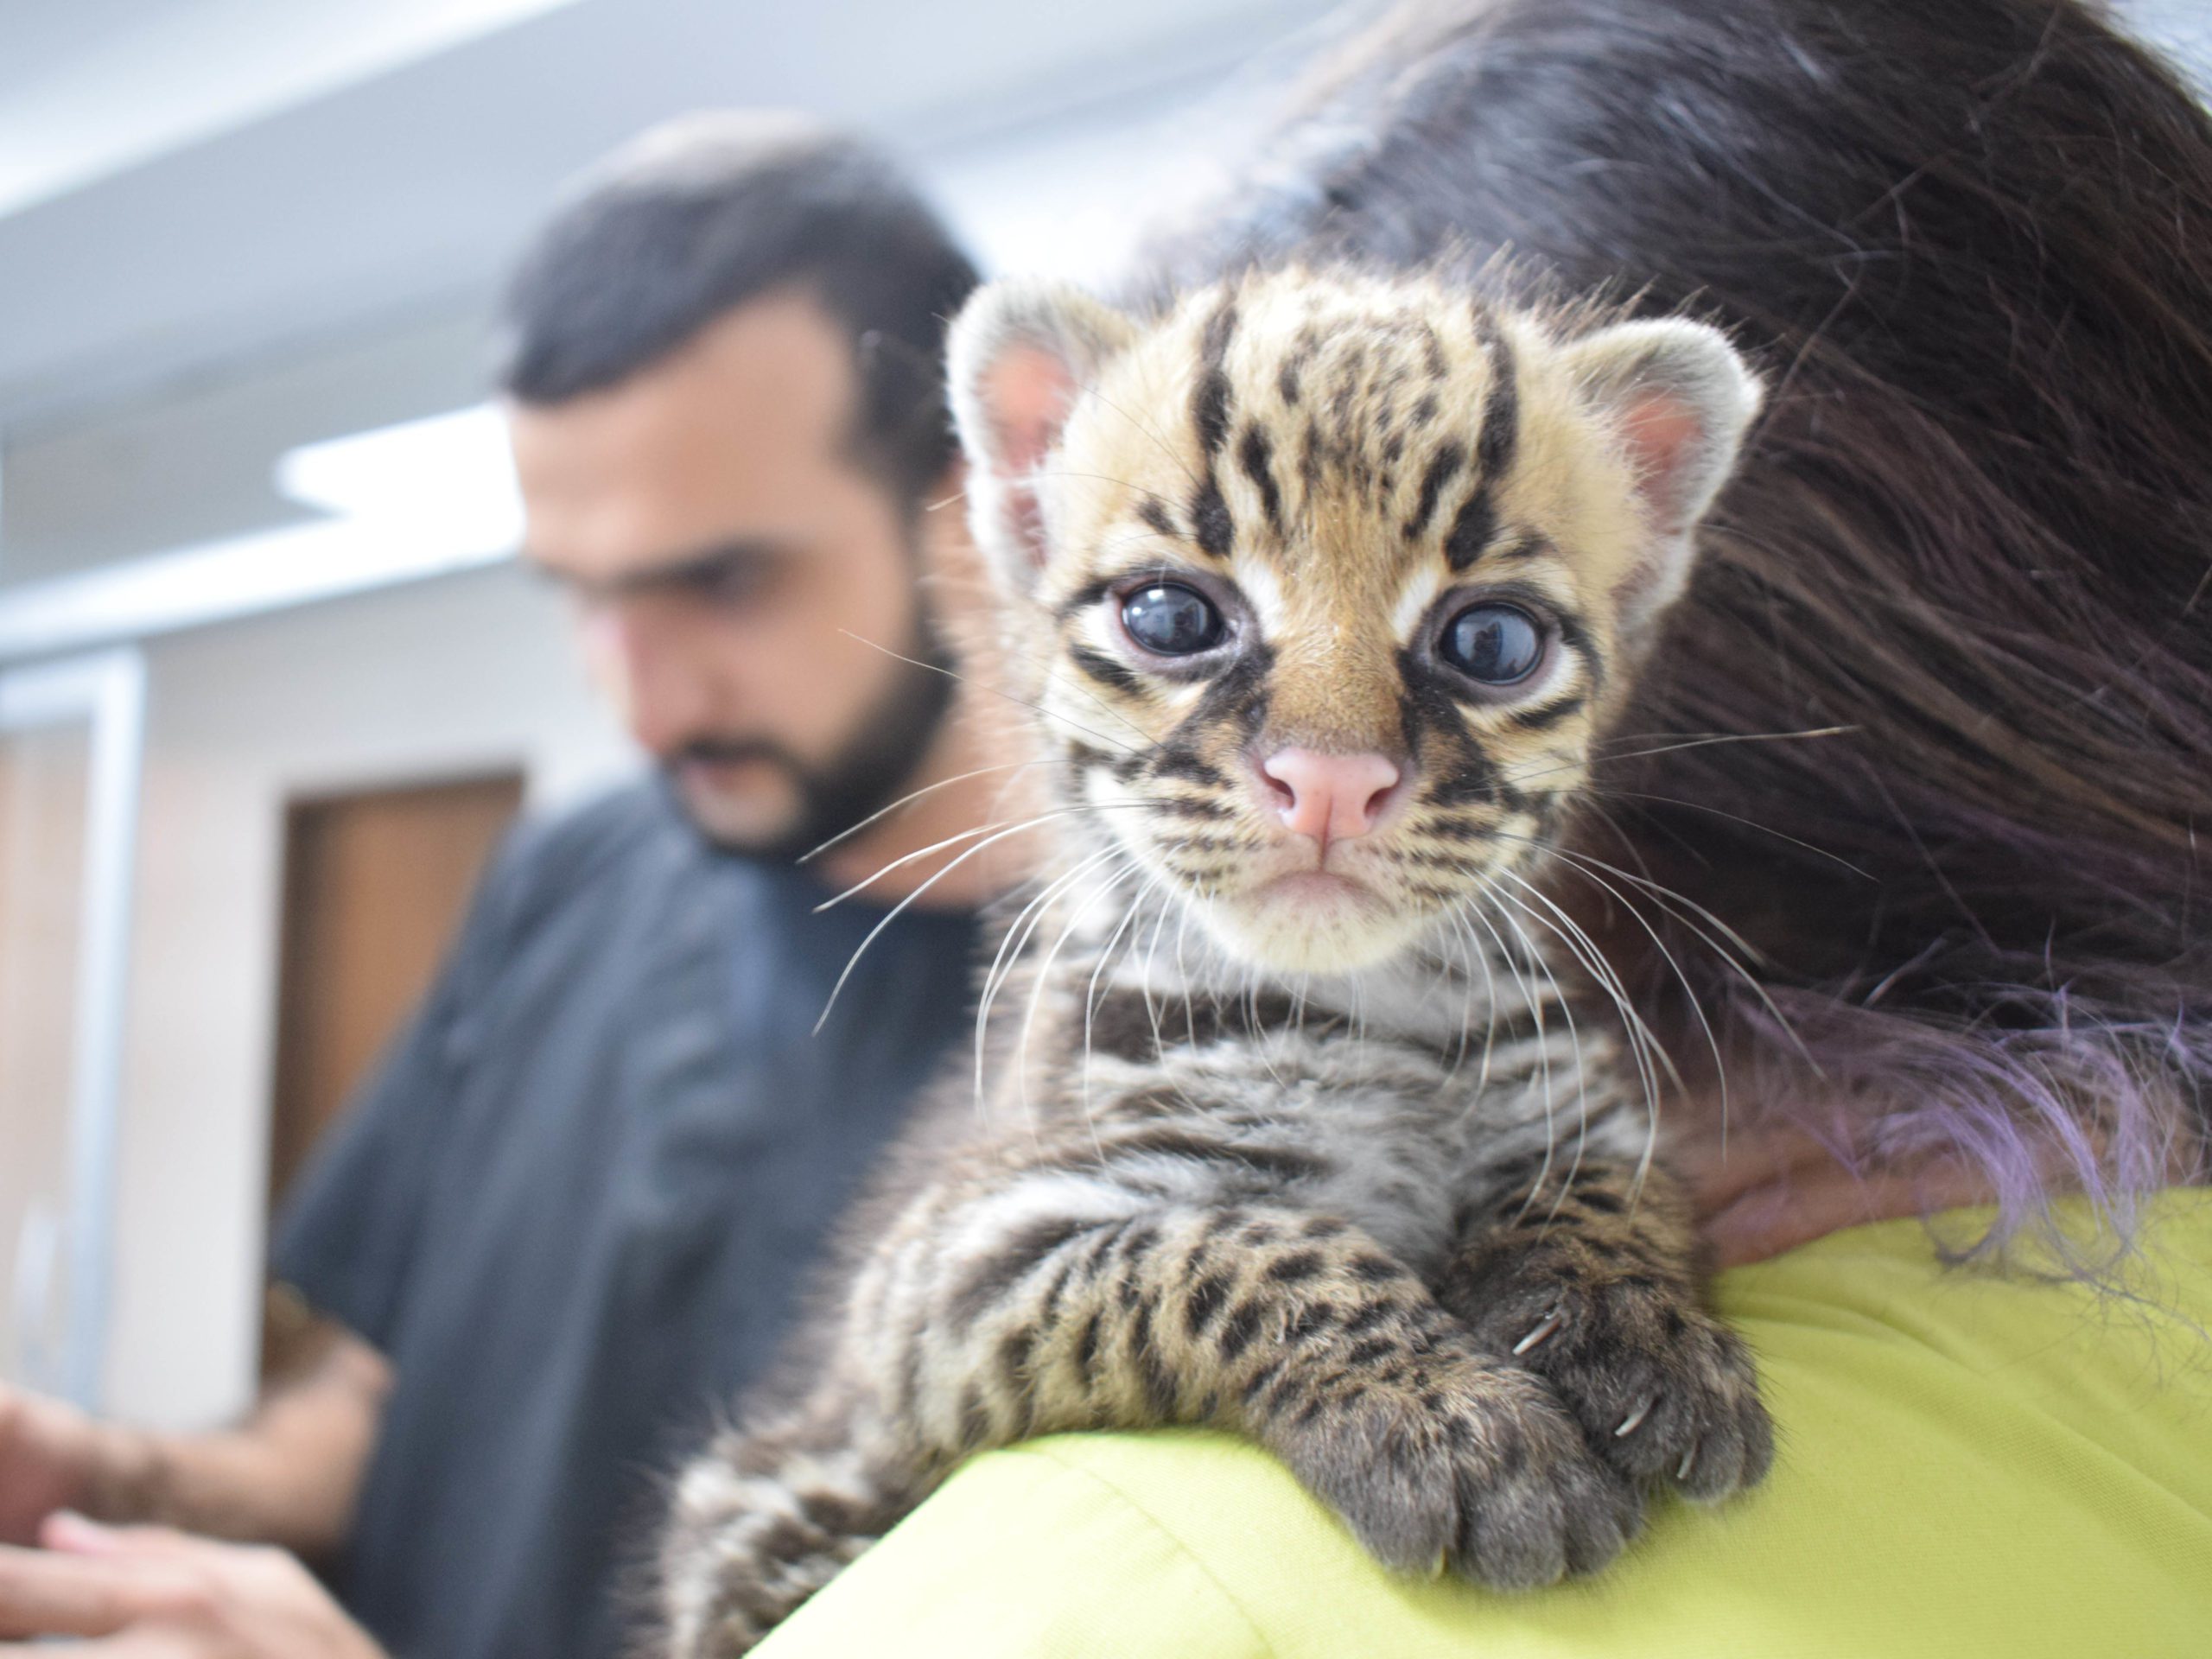 Sacha the ocelot, the first wild animal Eliana Molineros treated and the one who inspired the Sacha Project. He was less than 15 days old and one of the thousands of animal victims of trafficking or illicit commercialization each year